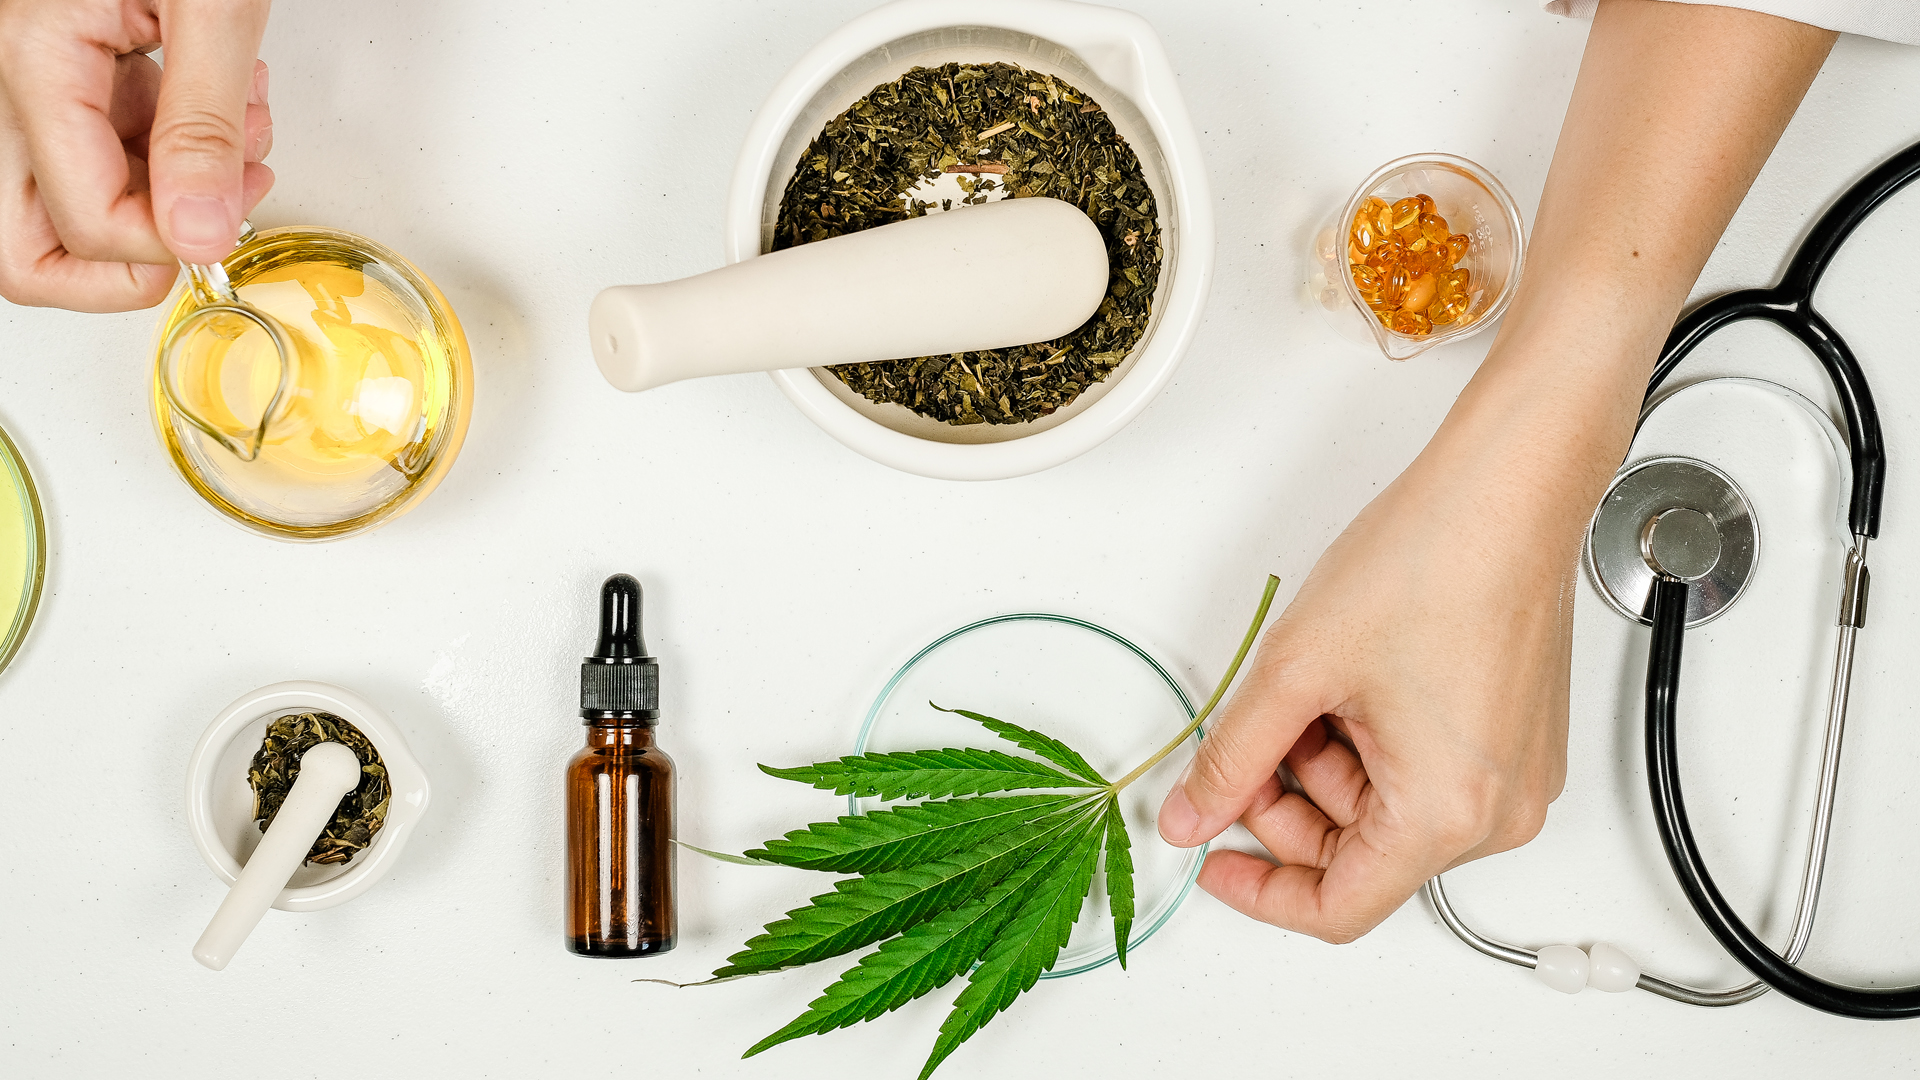 Elevating Intimacy with CBD Oil